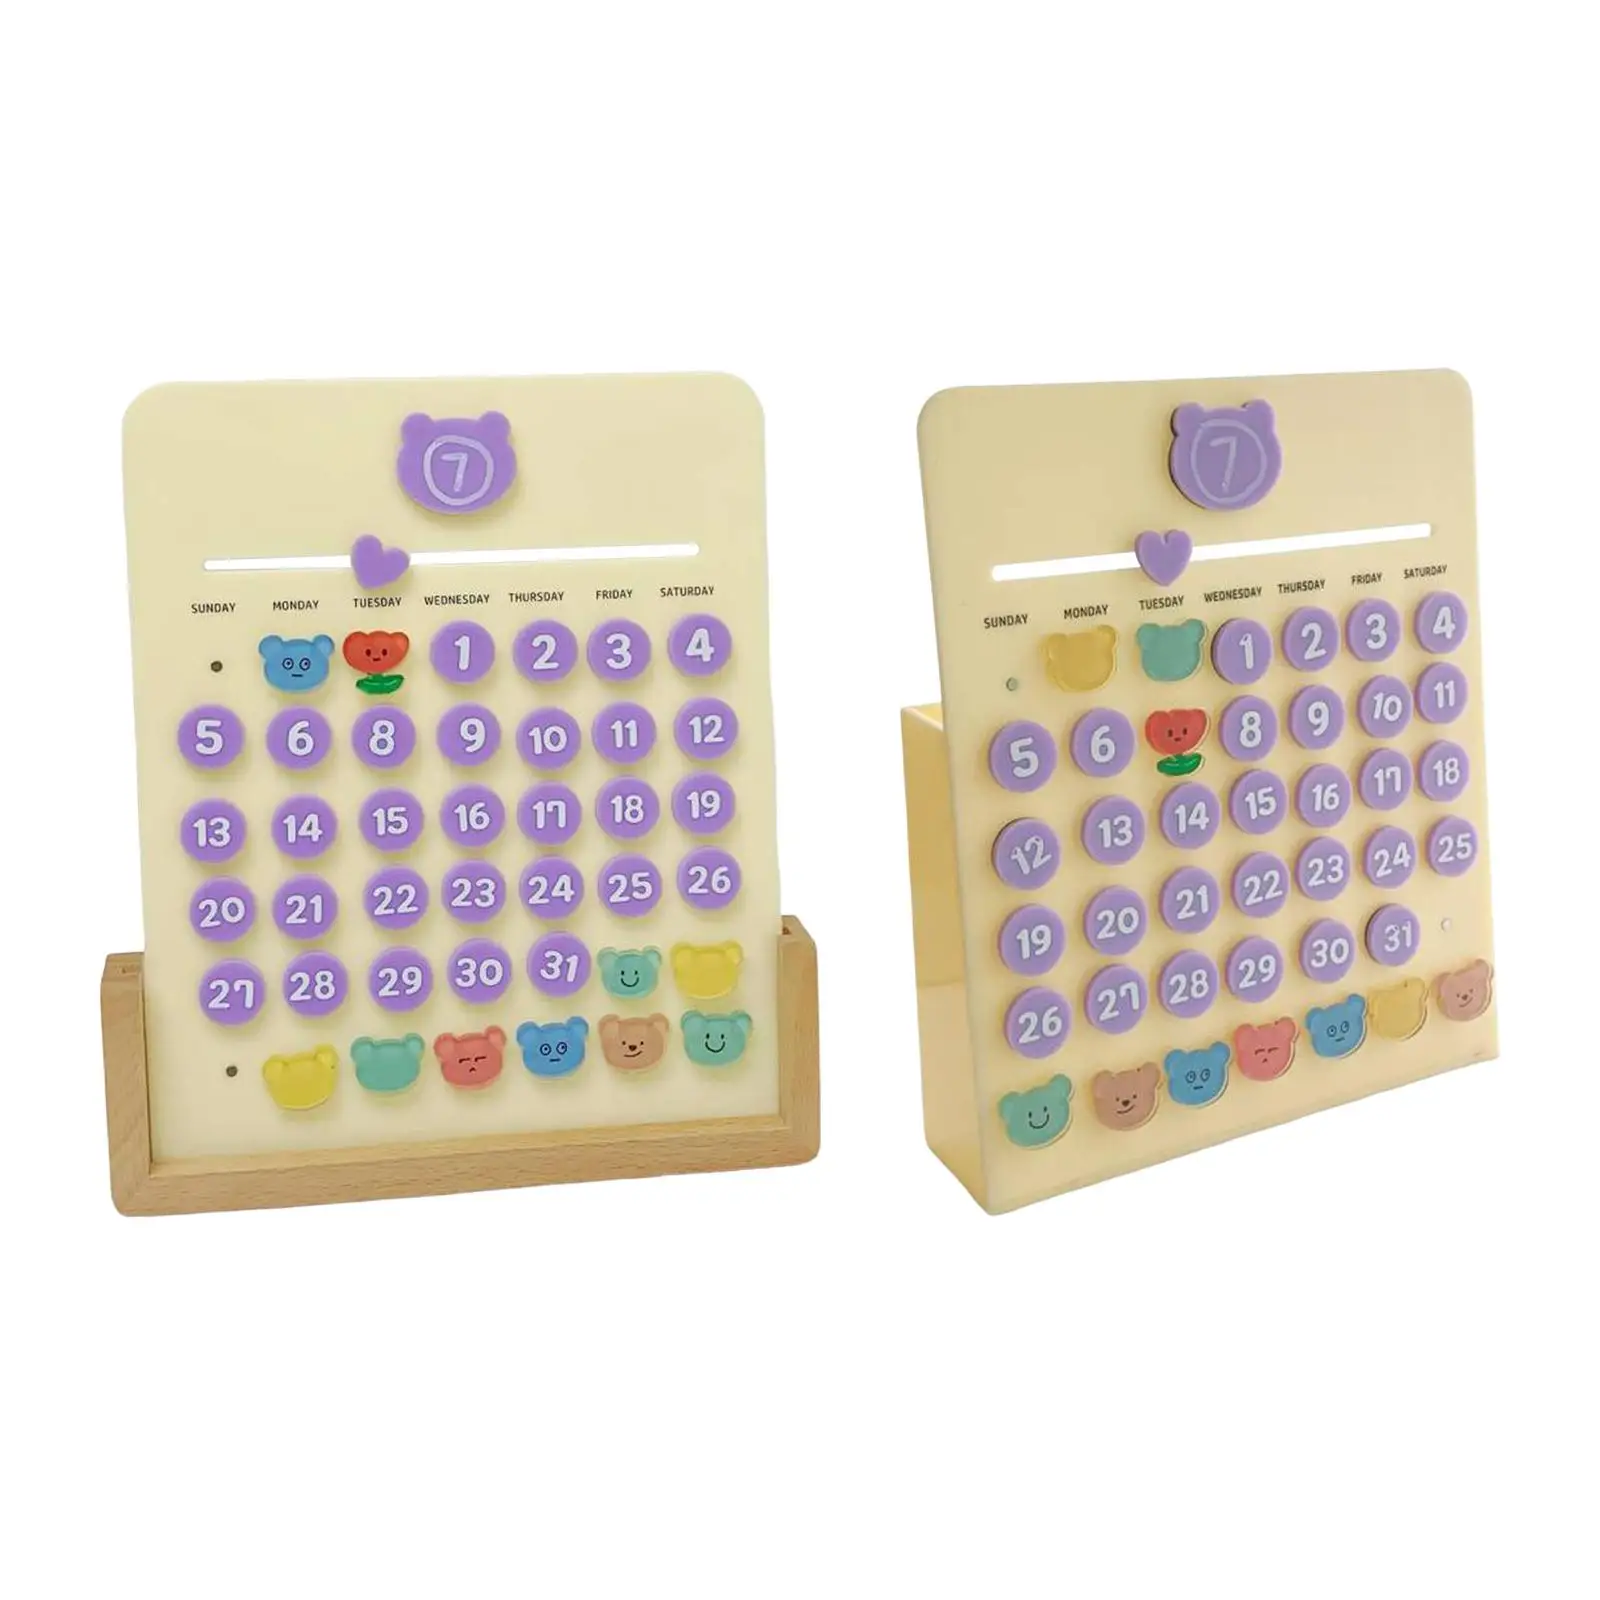 Perpetual Calendar Educational Toys Learn Months and Days of The Week Acrylic Children Learning Calendar for Desktop Shops Decor